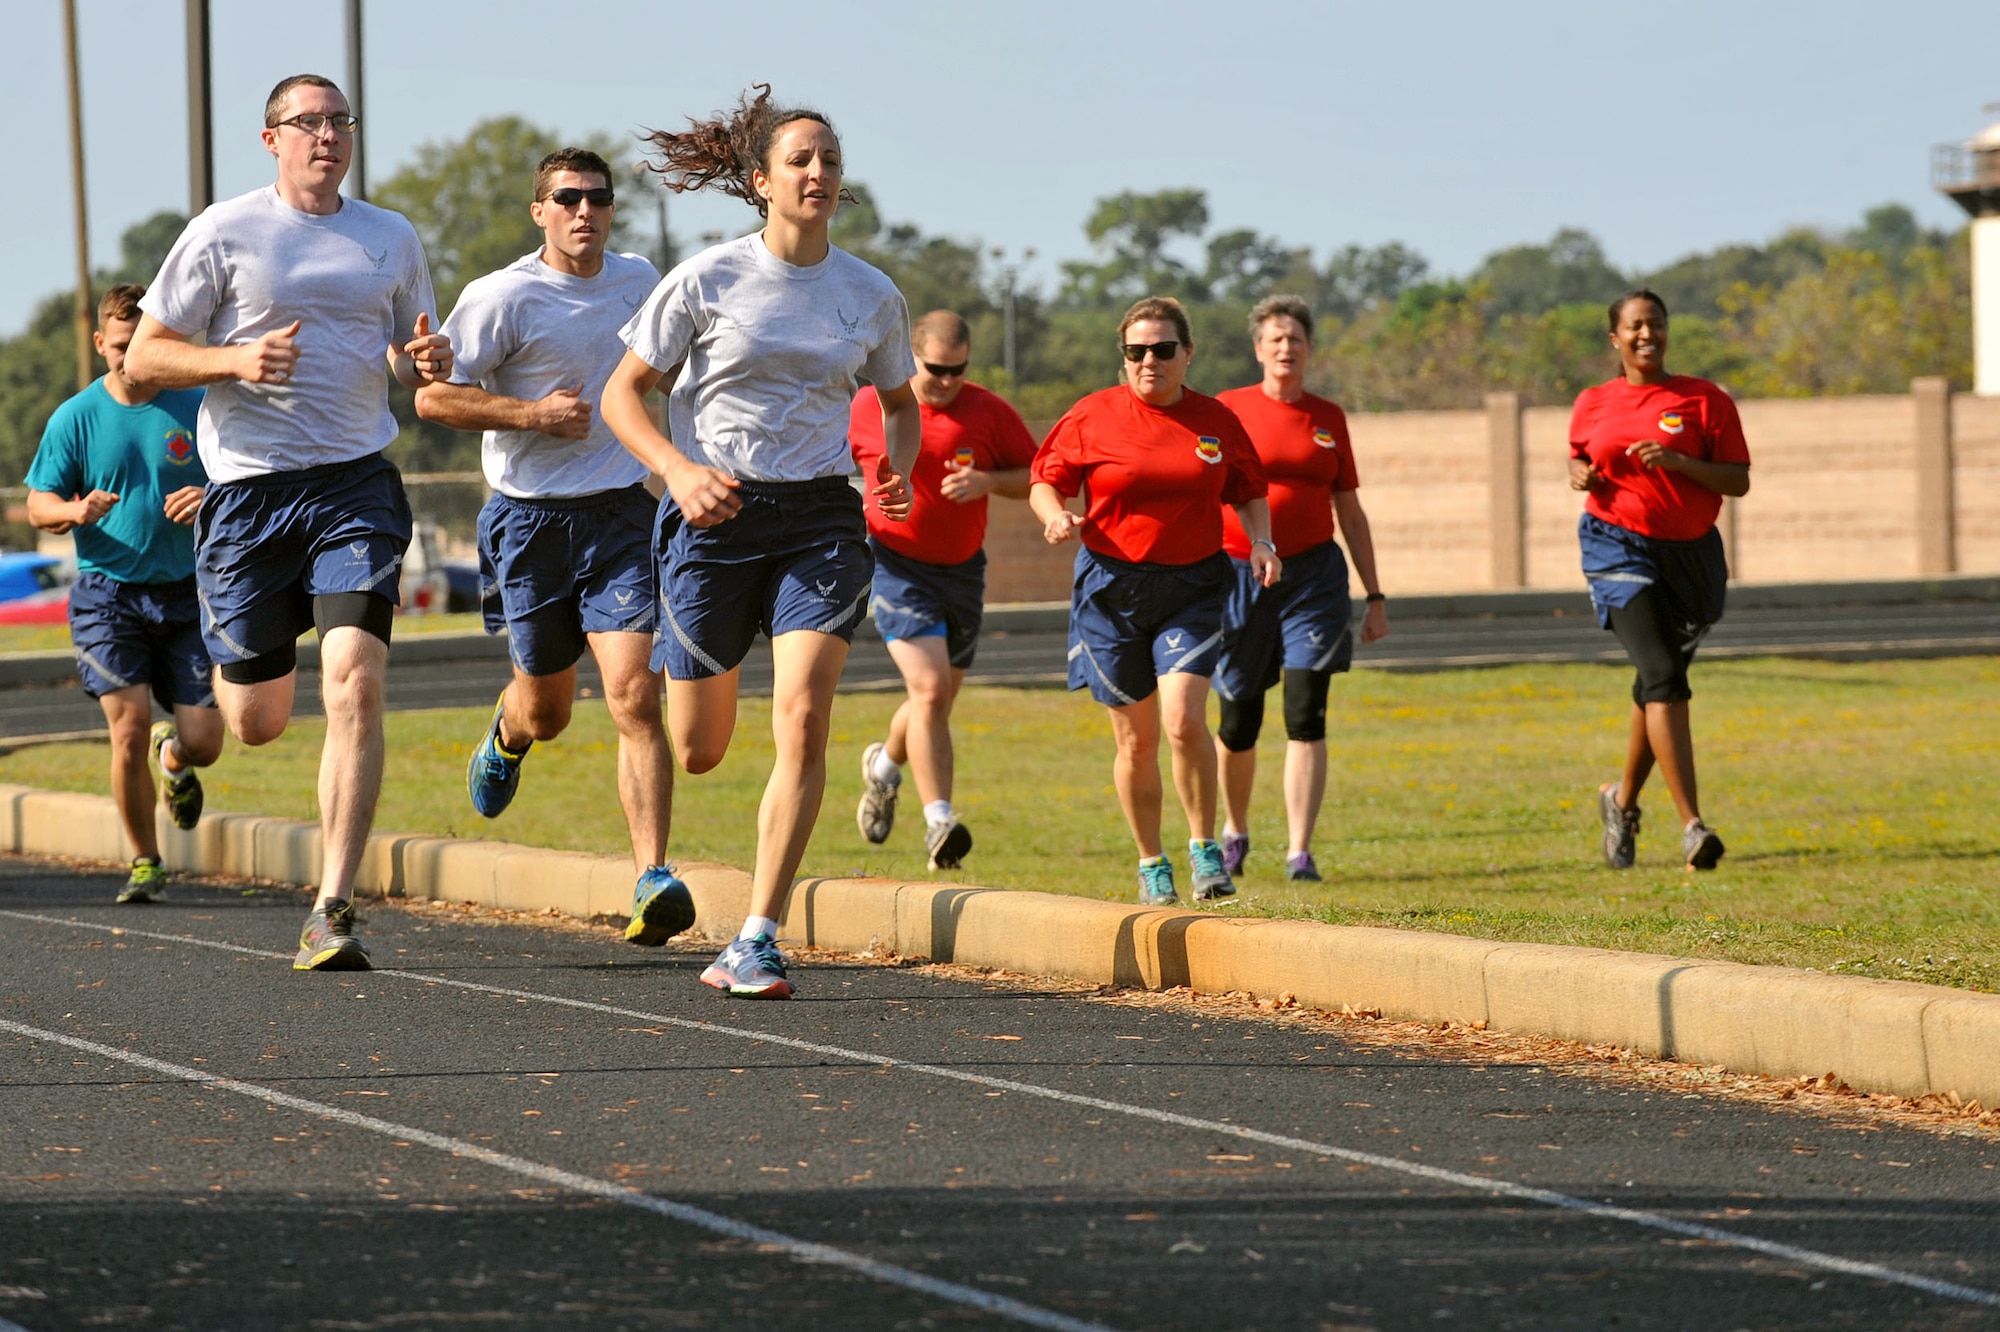 U.S Airmen assigned to the 20th Medical Group run during a Warrior Day commander’s challenge at Shaw Air Force Base, S.C., Sept. 29, 2017.